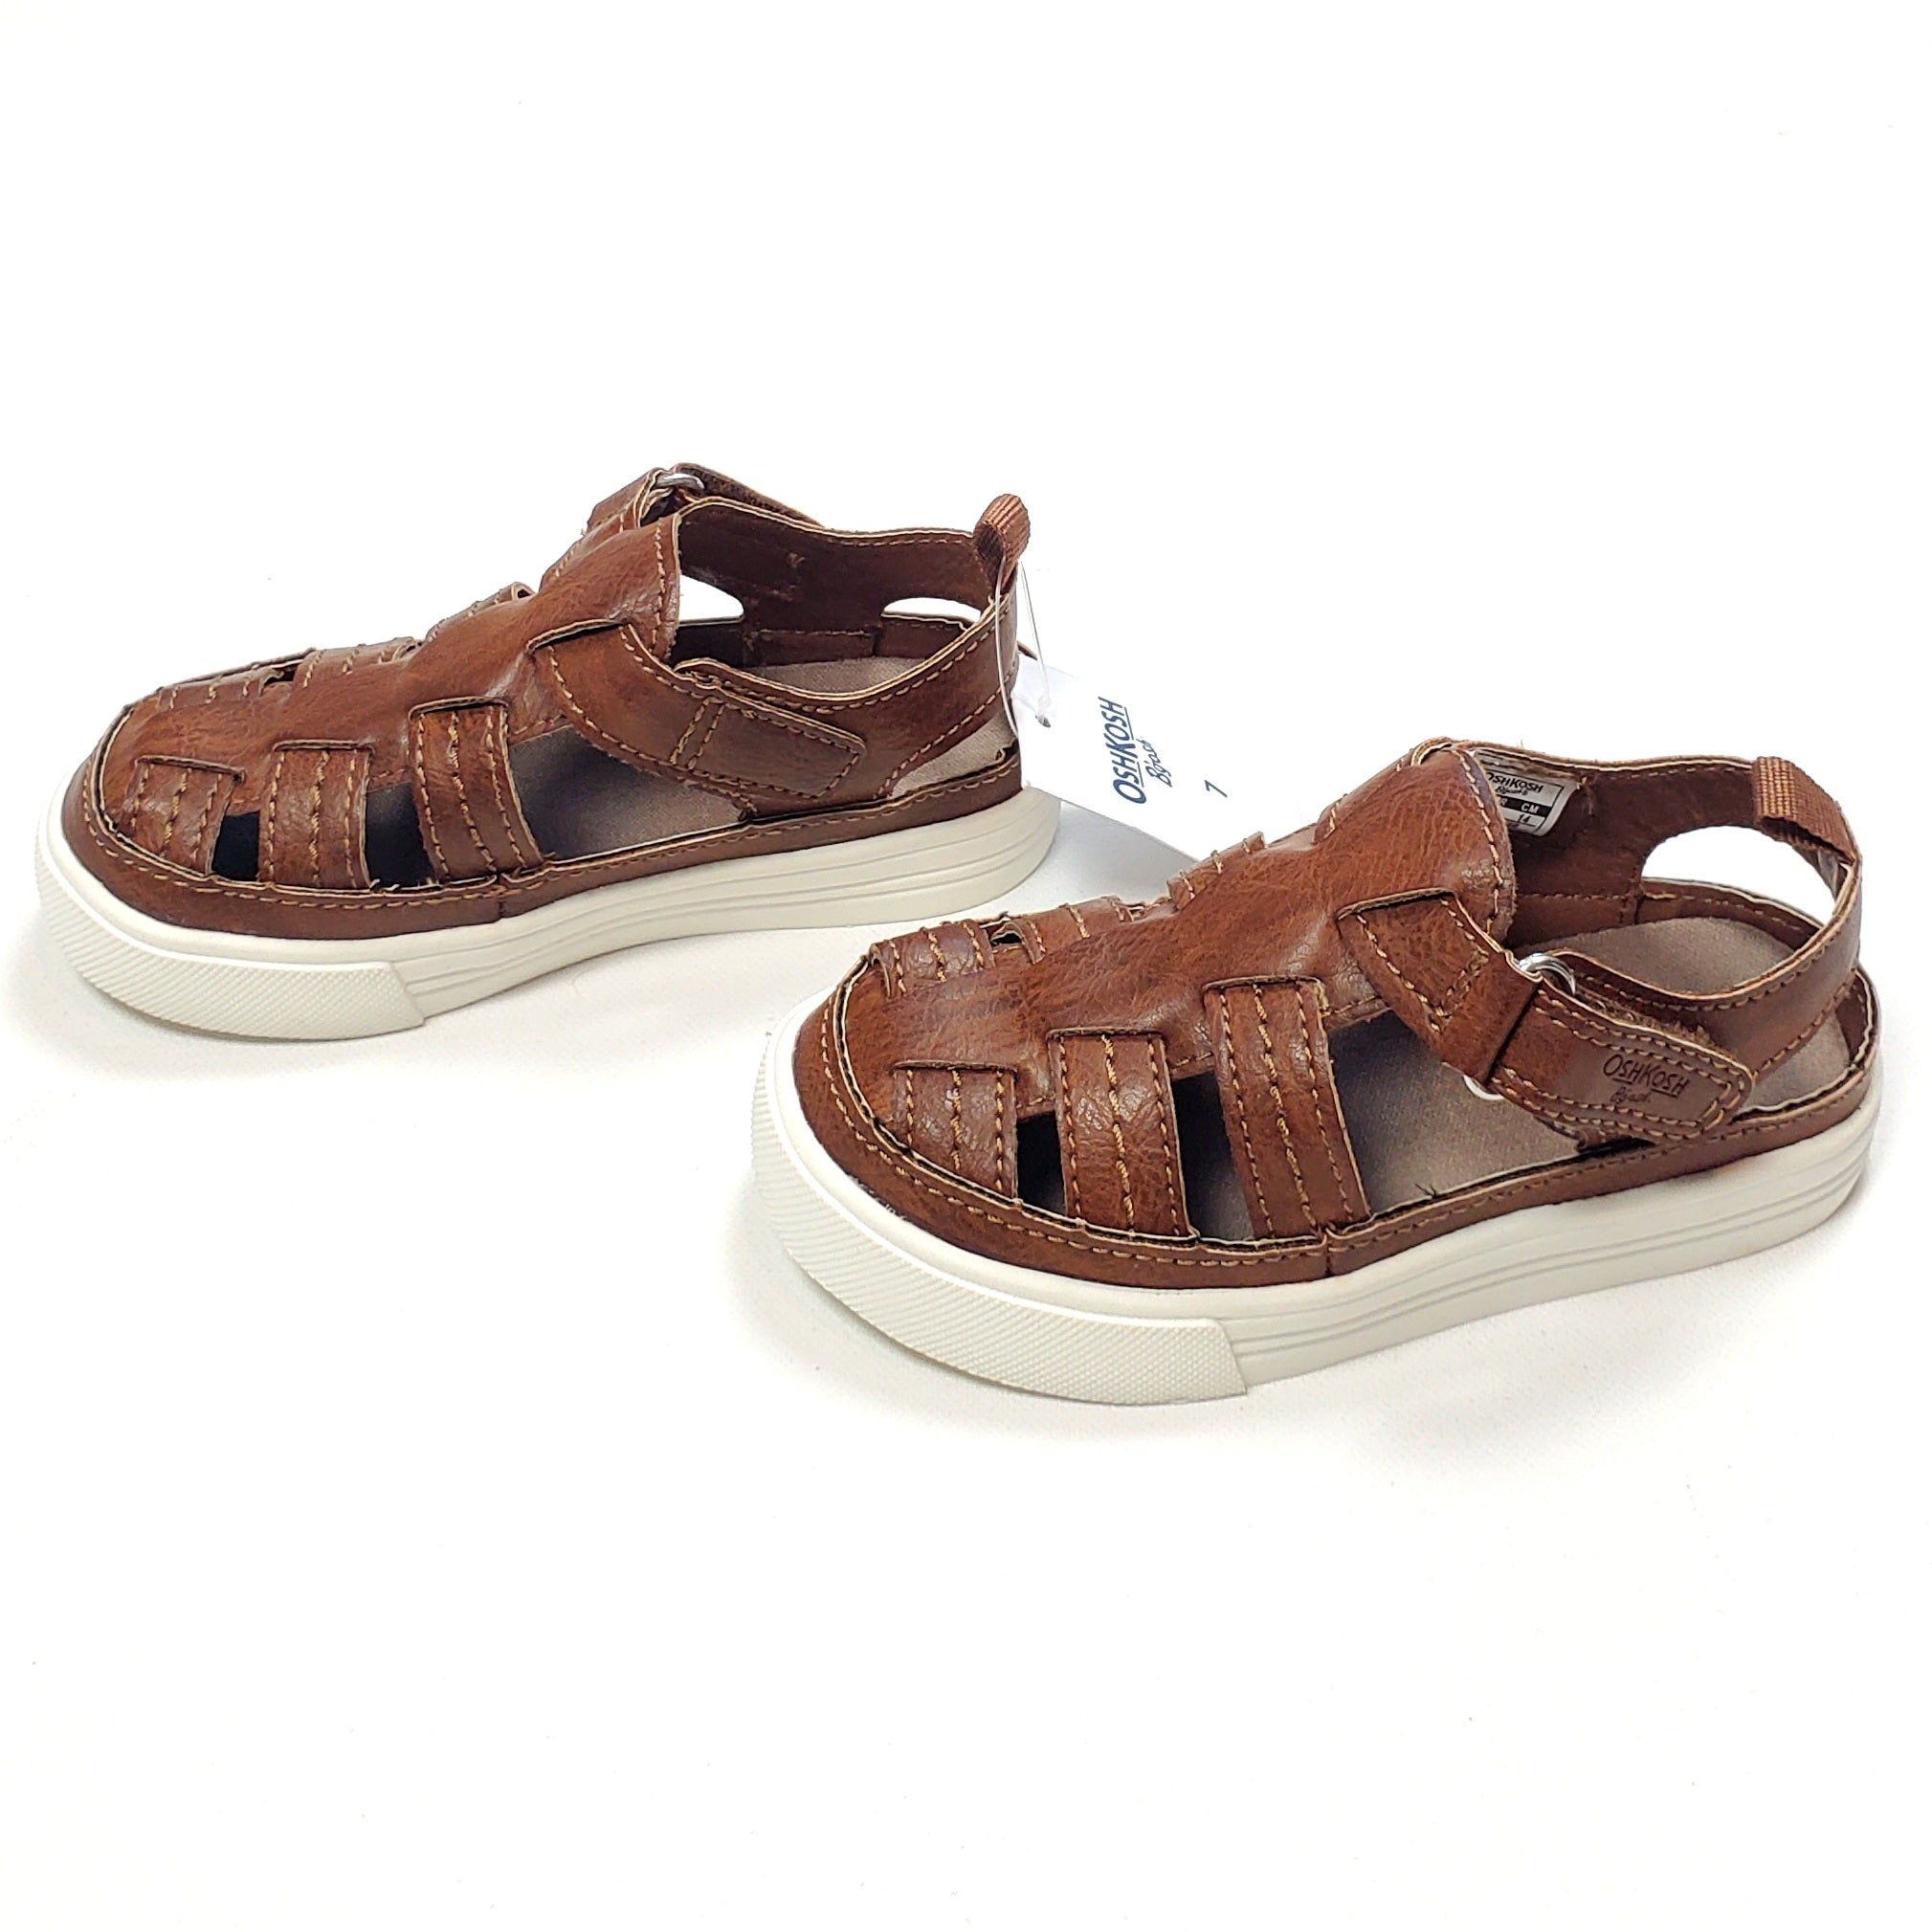 Hopscotch Boys Synthetic Leather Leather Sandals in Brown Color, UK:11  (BKU-4132442) : Amazon.in: Fashion